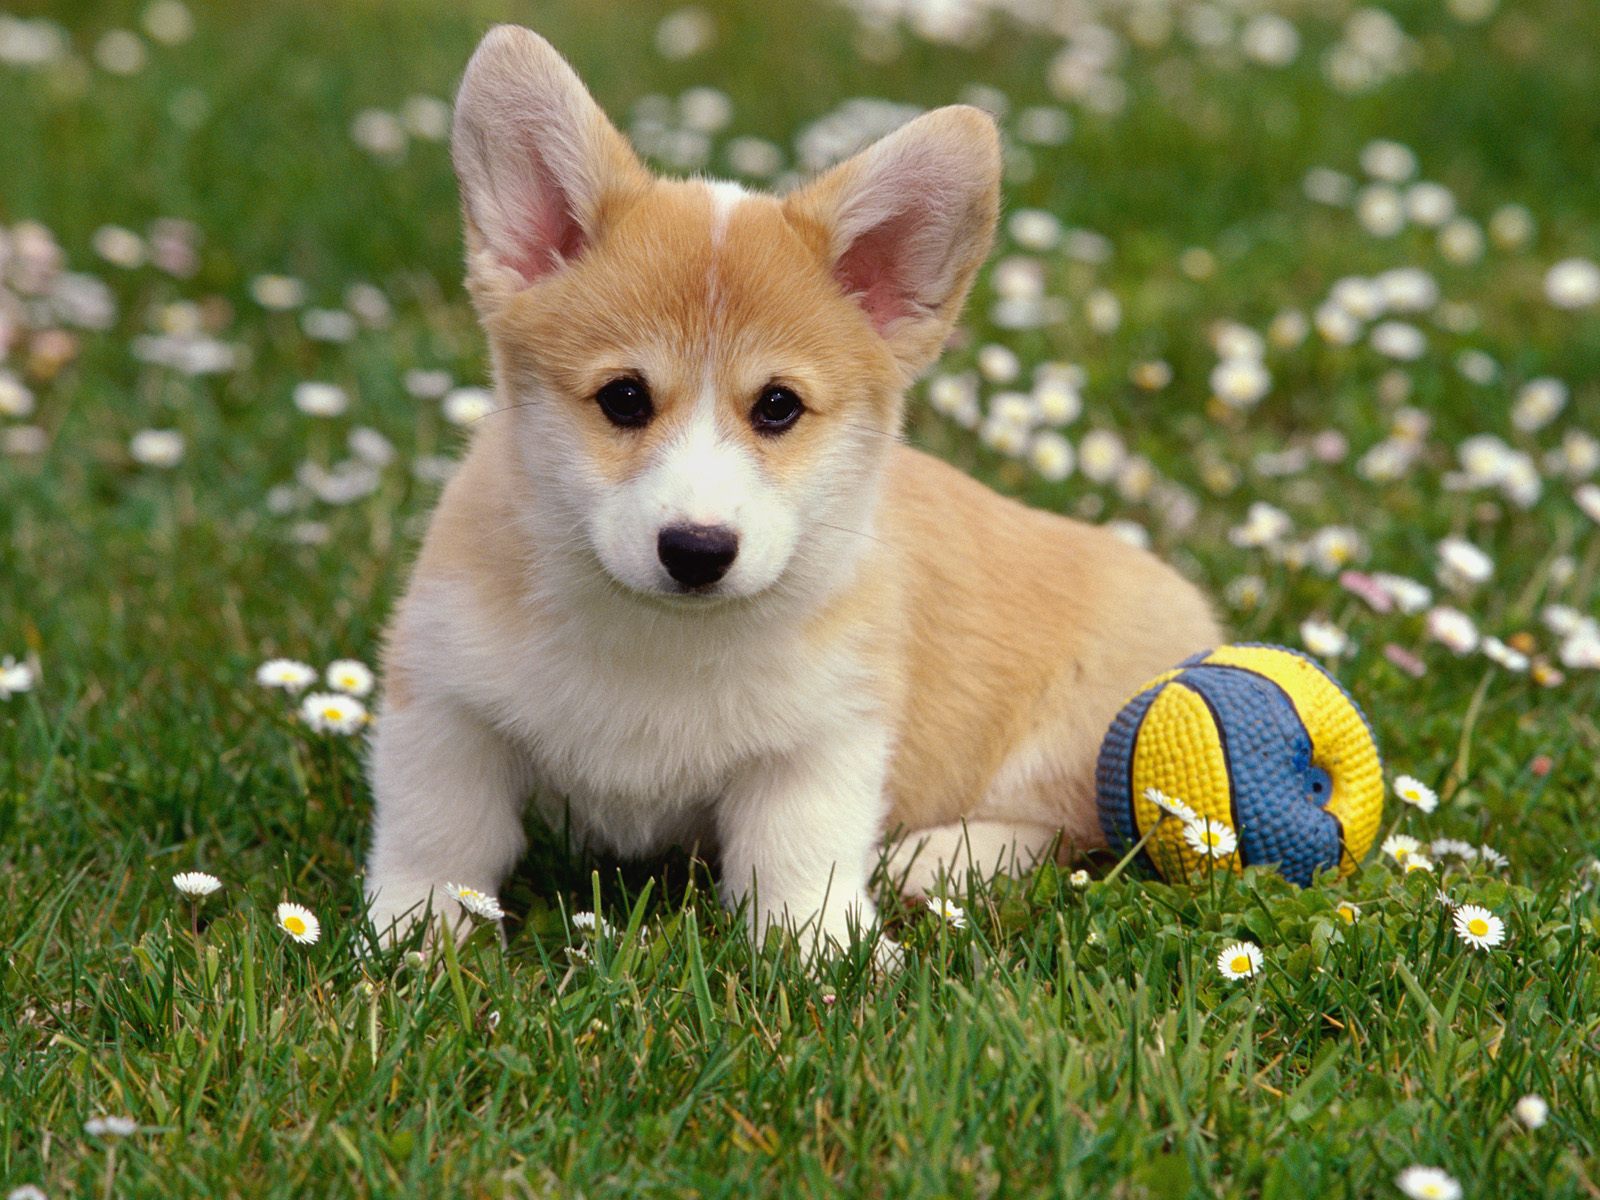 dog hd wallpapers images for dog hd dog wallpapers full hd wallpaper